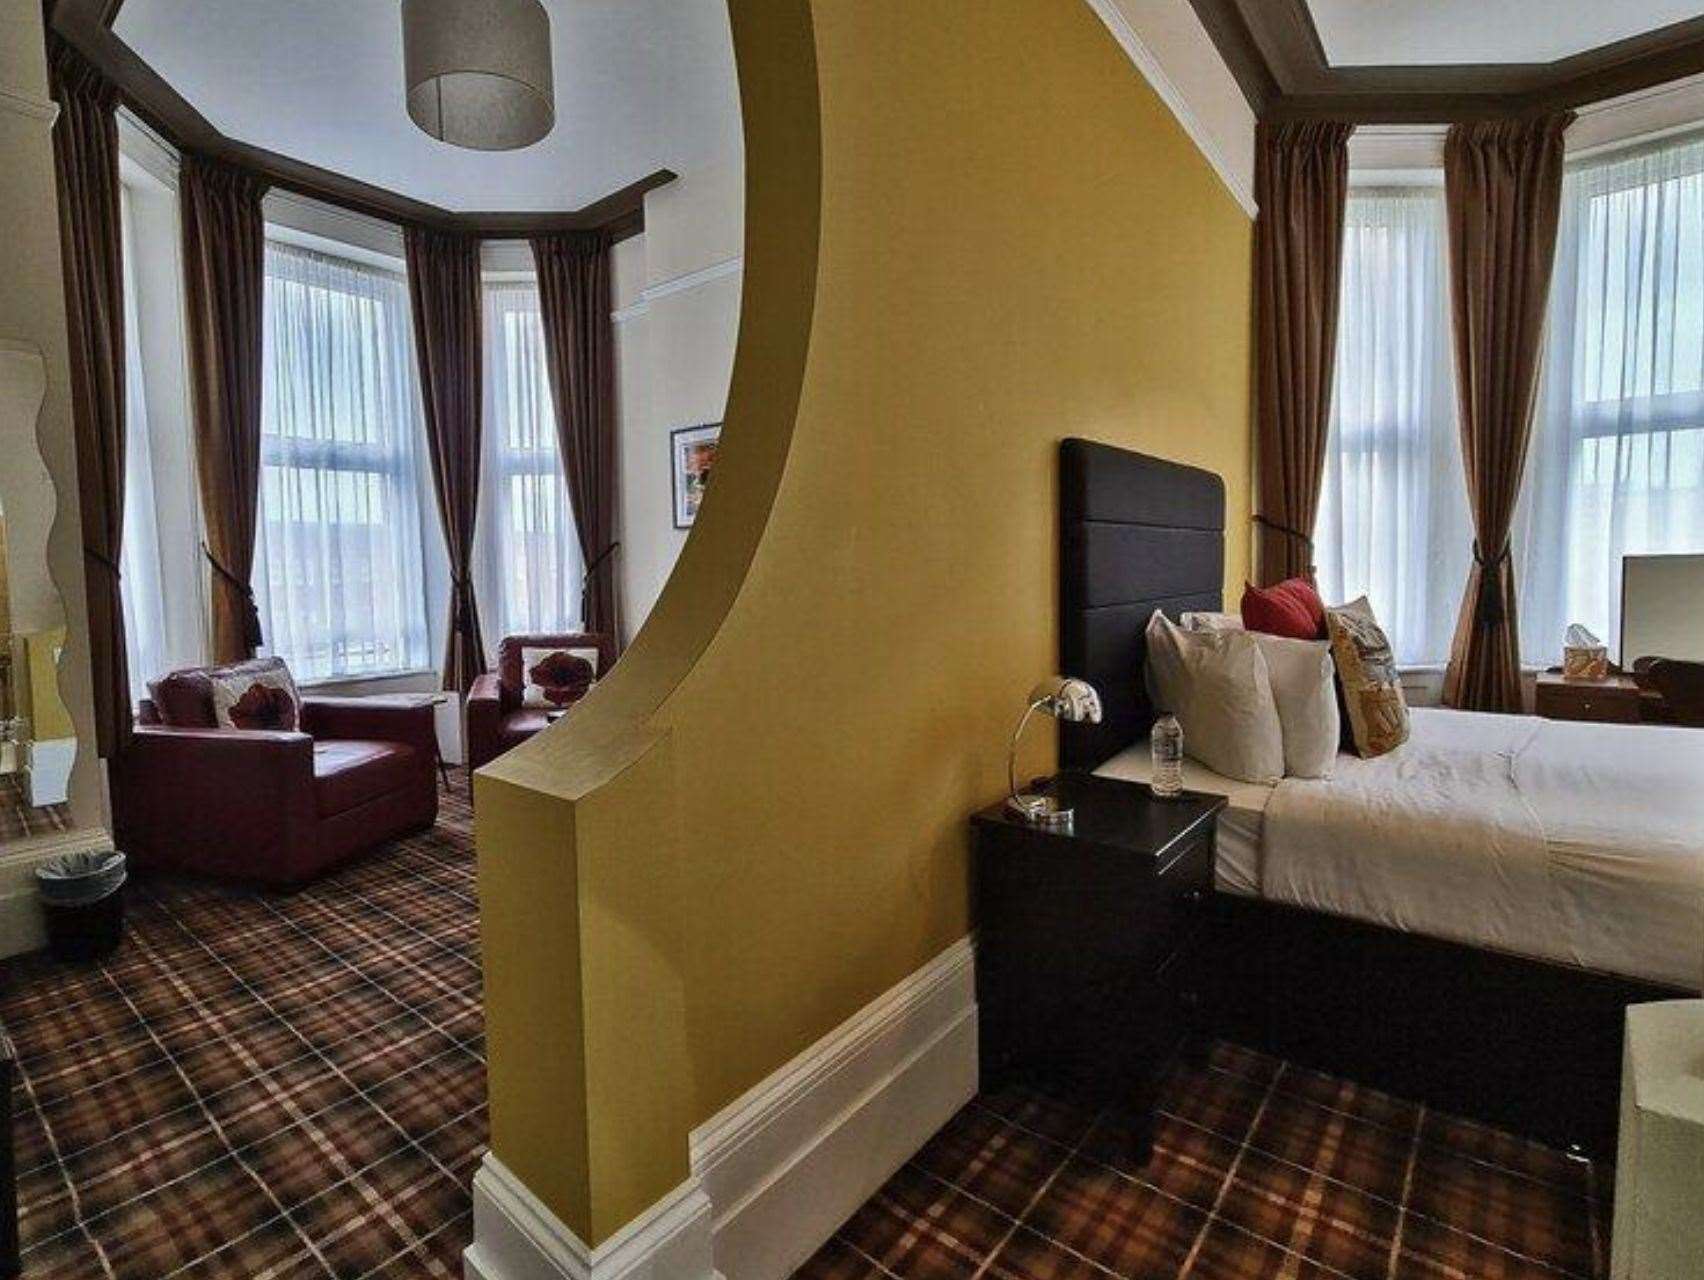 One of the 12 bedrooms in use. Picture: Sidney Phillips